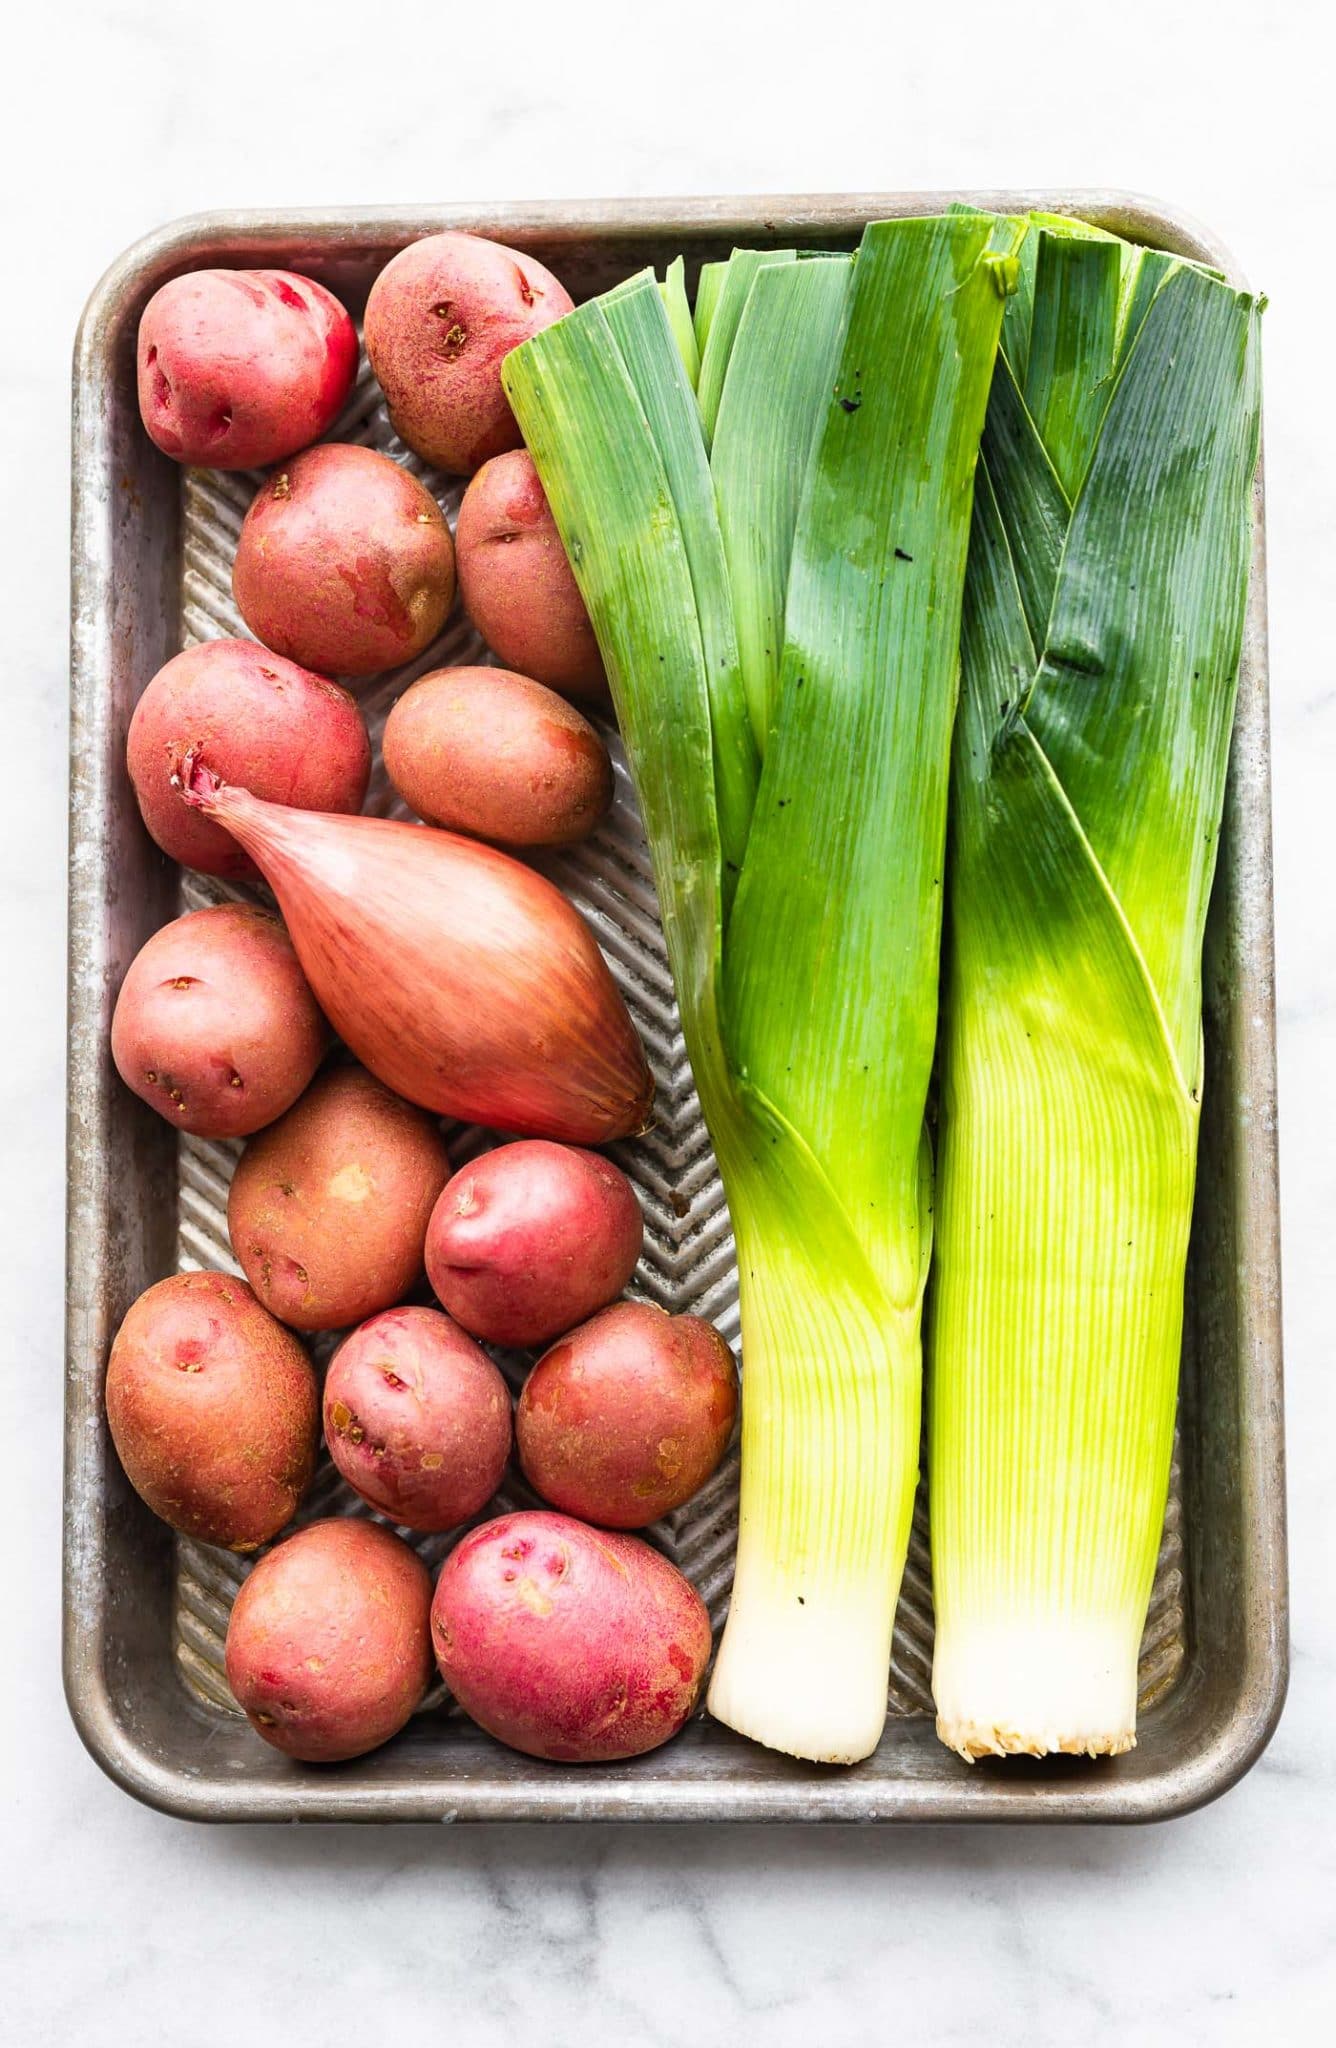 a sheet pan holding raw whole red onions, a full shallot, and two leeks